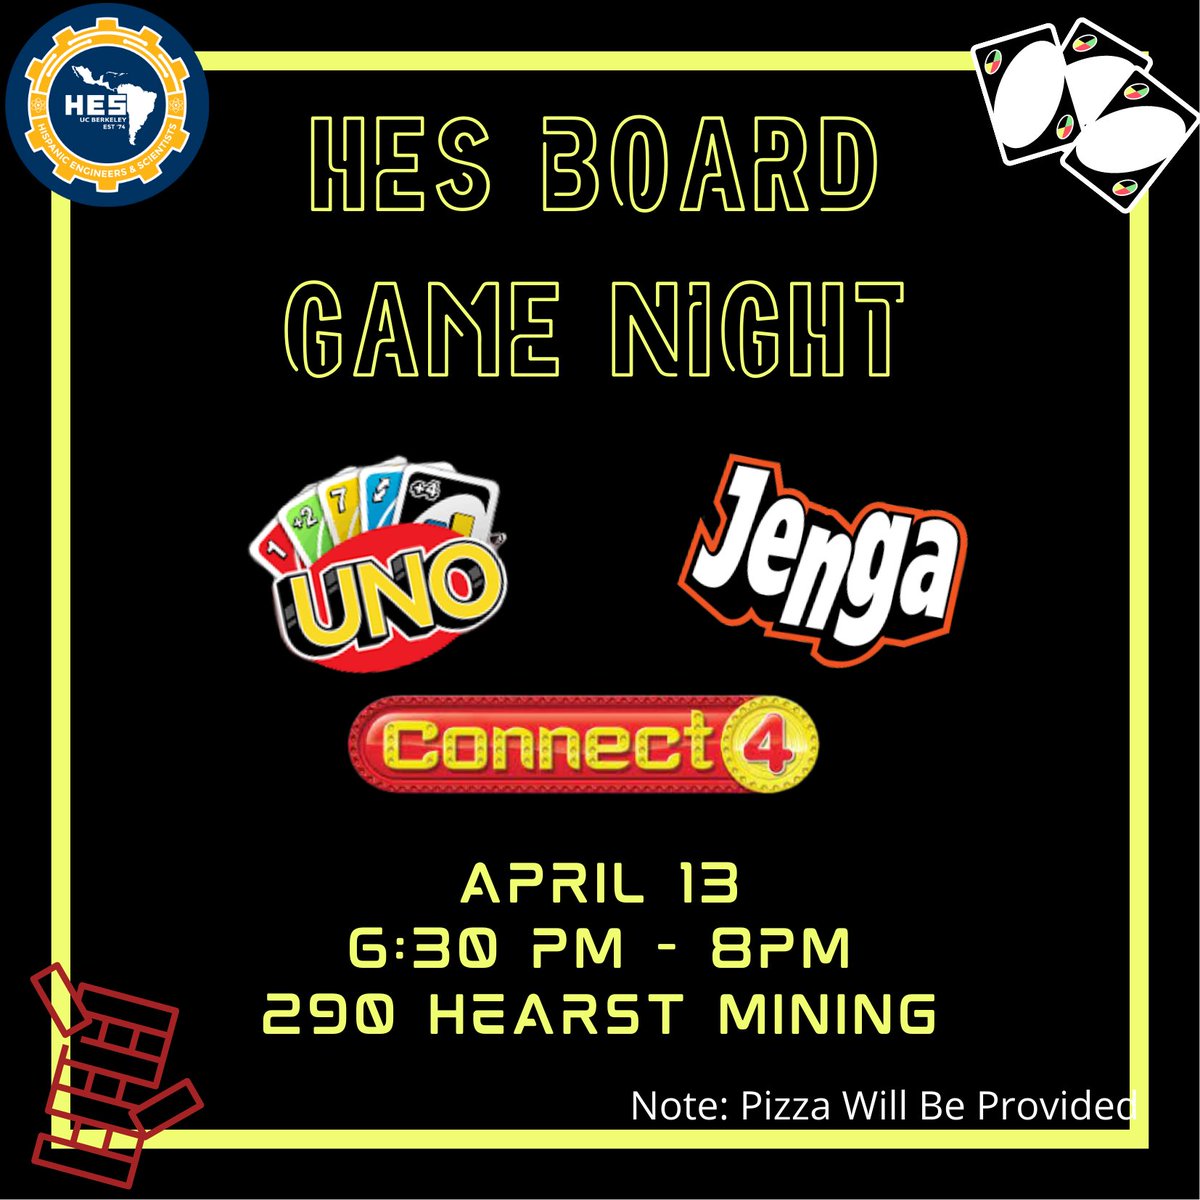 Happy Sunday! Hope y’all got some well deserved rest 🥰 HES would like to invite y’all to our Board Game Night! 🃏 As the semester comes to end, we want to have fun with y’all.🤩 Join us for a fun night with delicious pizza🍕😋 Have a good week! 💙